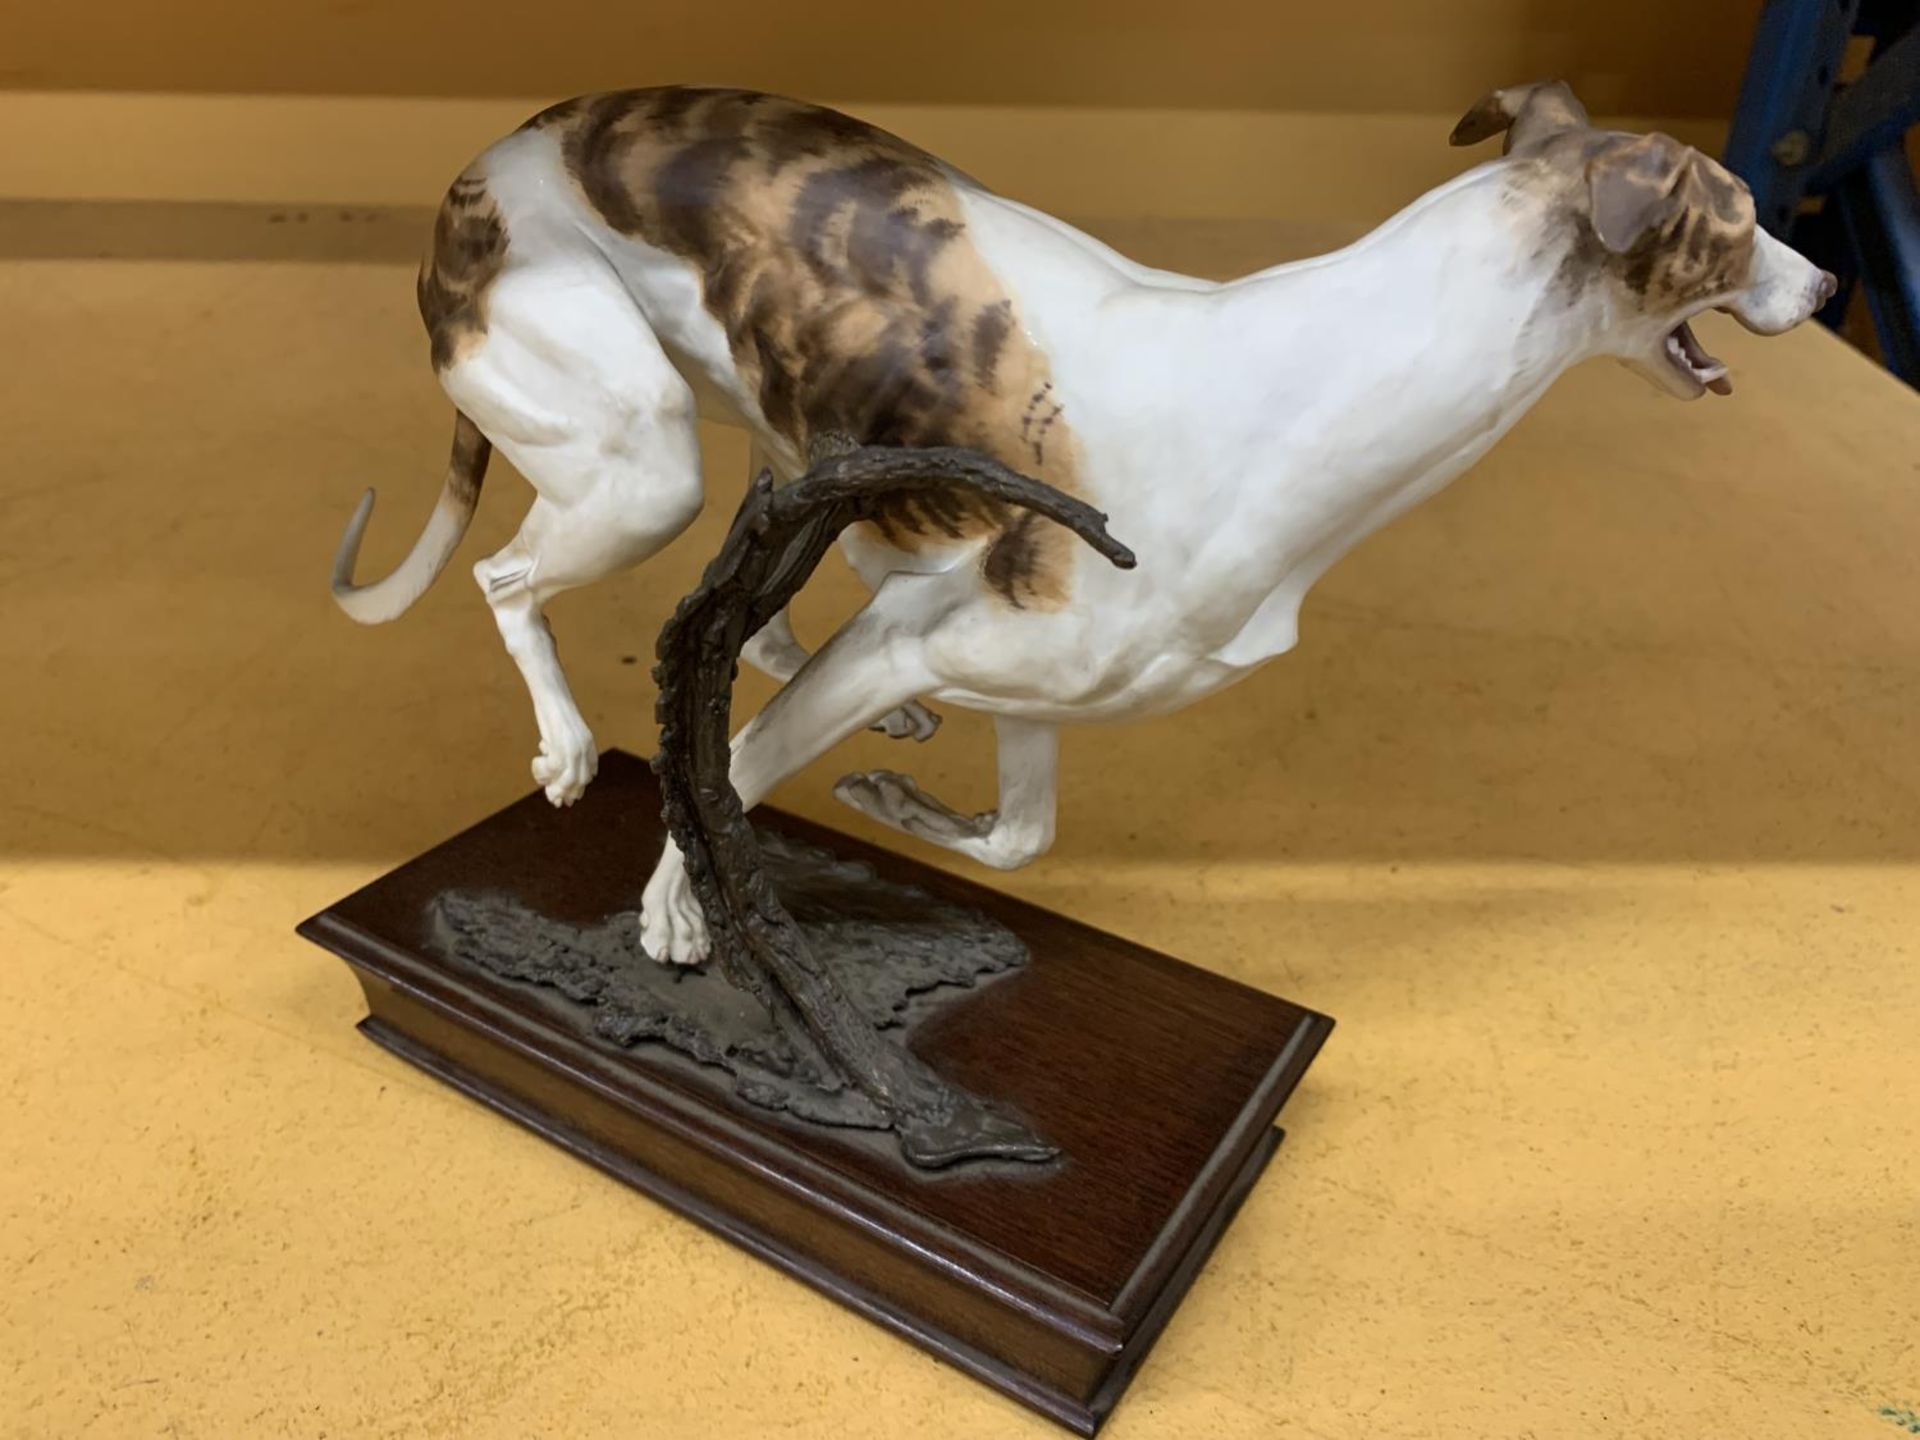 AN ALBANY FINE CHINA MODEL OF A GREYHOUND BY NEIL CAMPBELL, LILMITED EDITION 98/250 WITH CERTIFICATE - Image 4 of 6